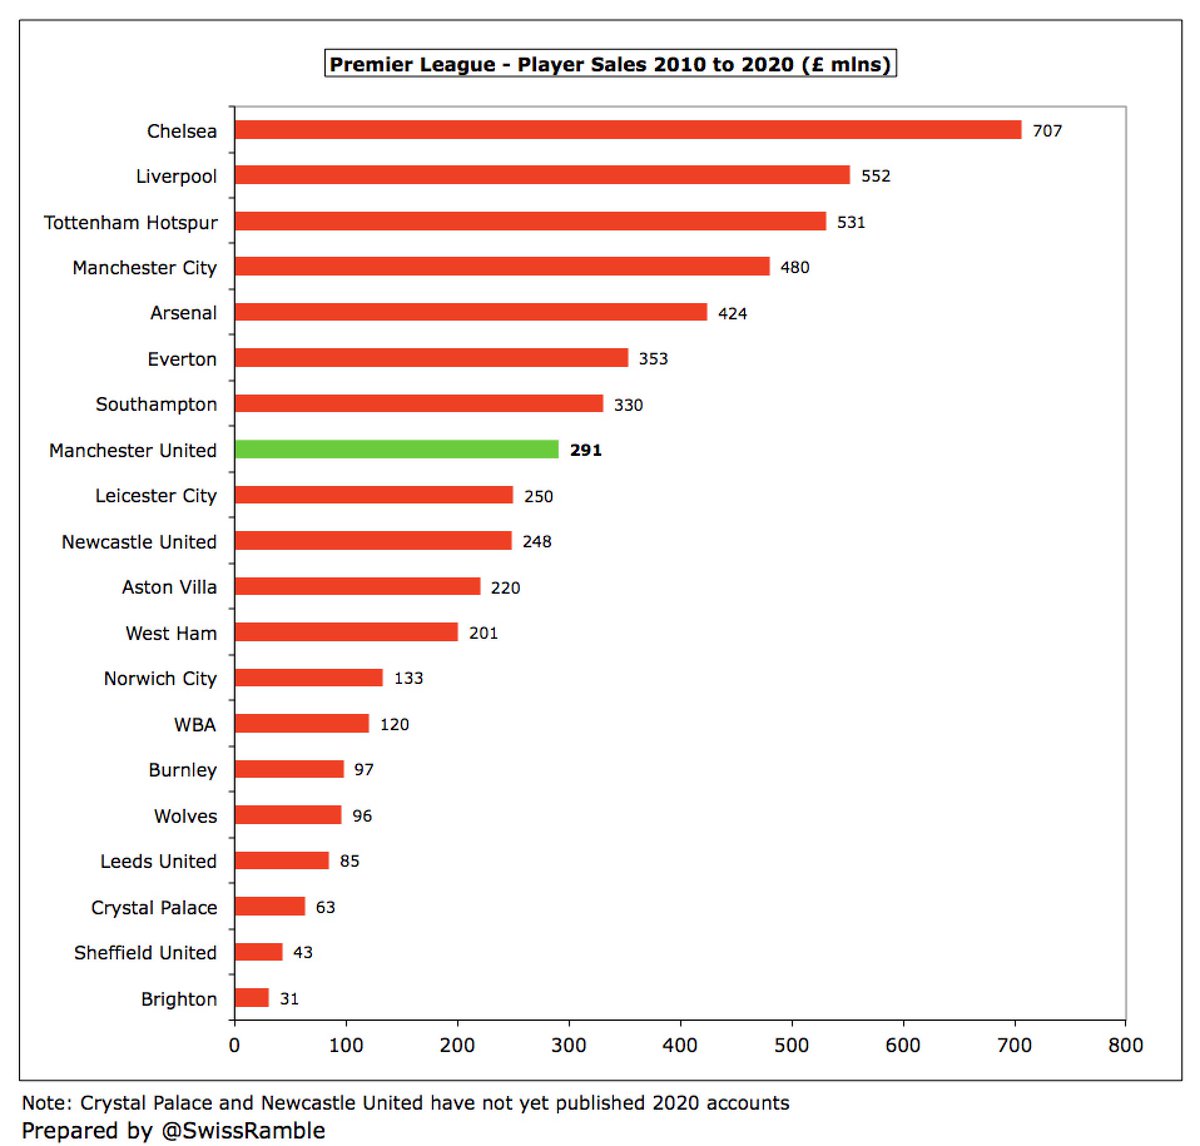 Many clubs make good money from player sales, but  #MUFC have only delivered £291m from the activity in the last 11 years, significantly less than  #CFC £707m and  #LFC £552m. Not only is this lower than the rest of the Big Six, but also worse than  #EFC and  #SaintsFC.